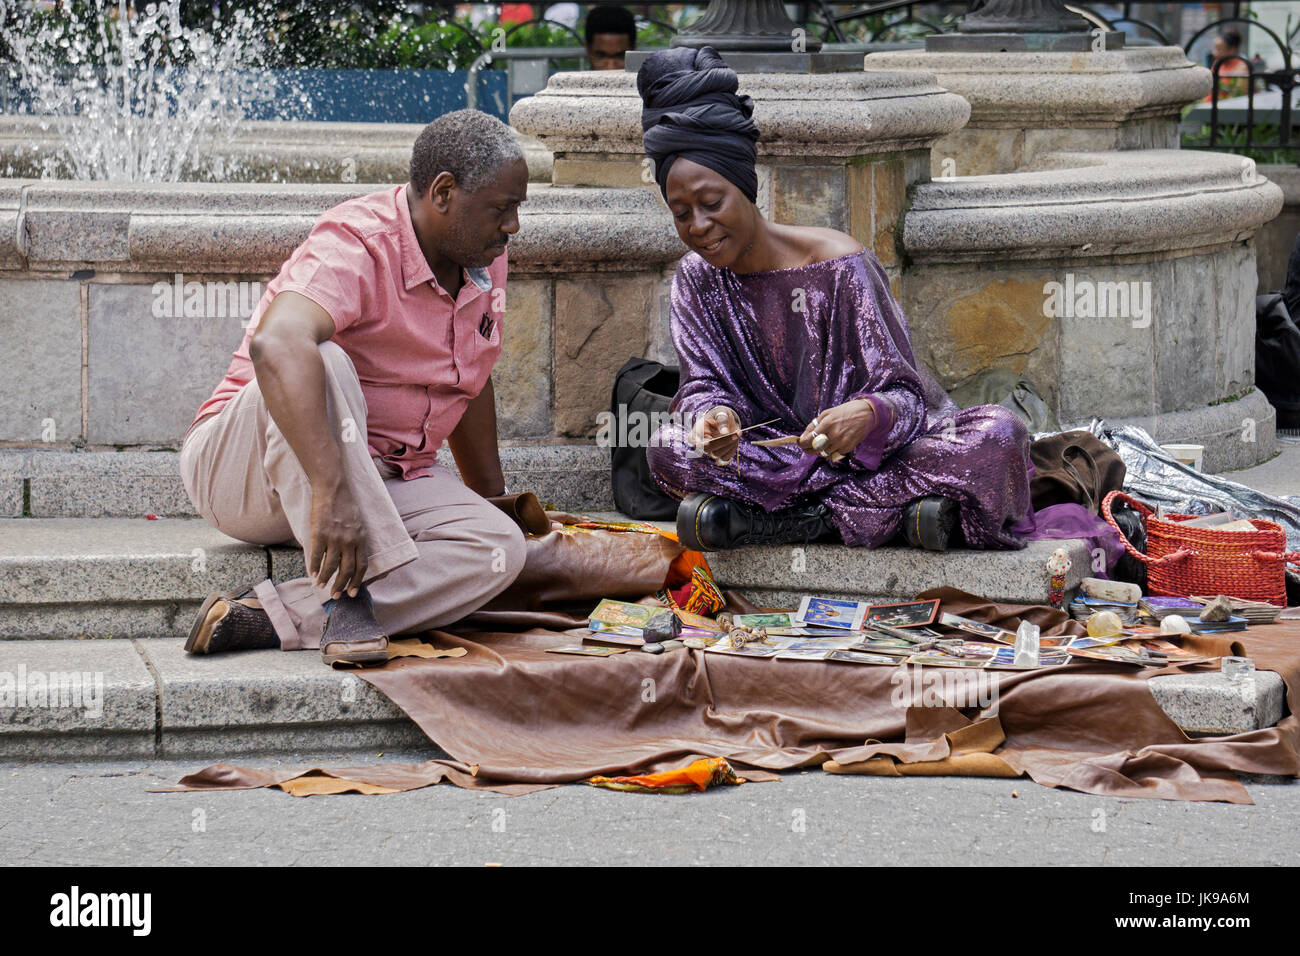 A psychic tarot card reader givers a reading in Union Square Park in Manhattan, New York City Stock Photo